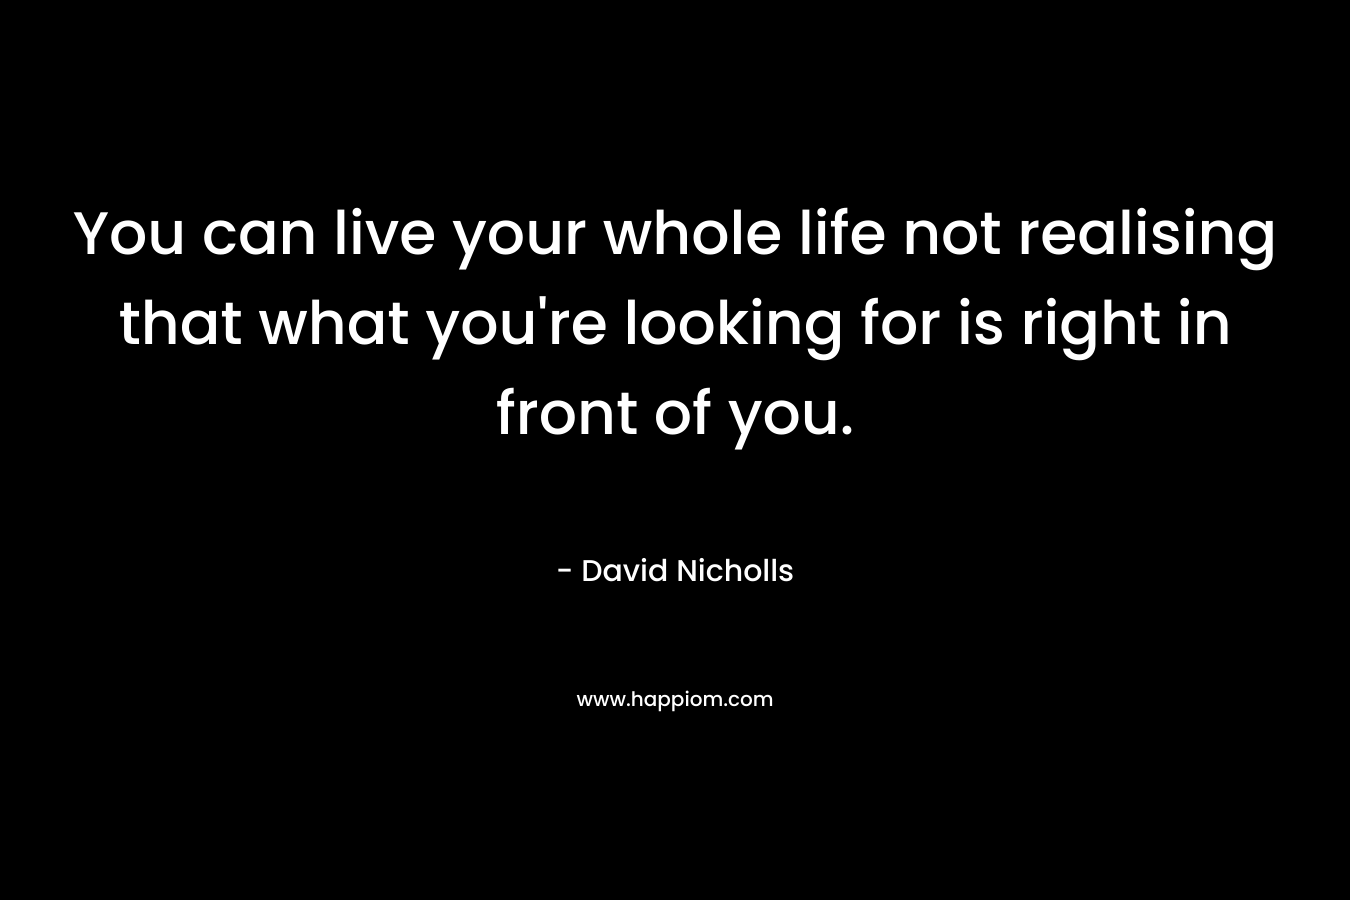 You can live your whole life not realising that what you’re looking for is right in front of you. – David Nicholls